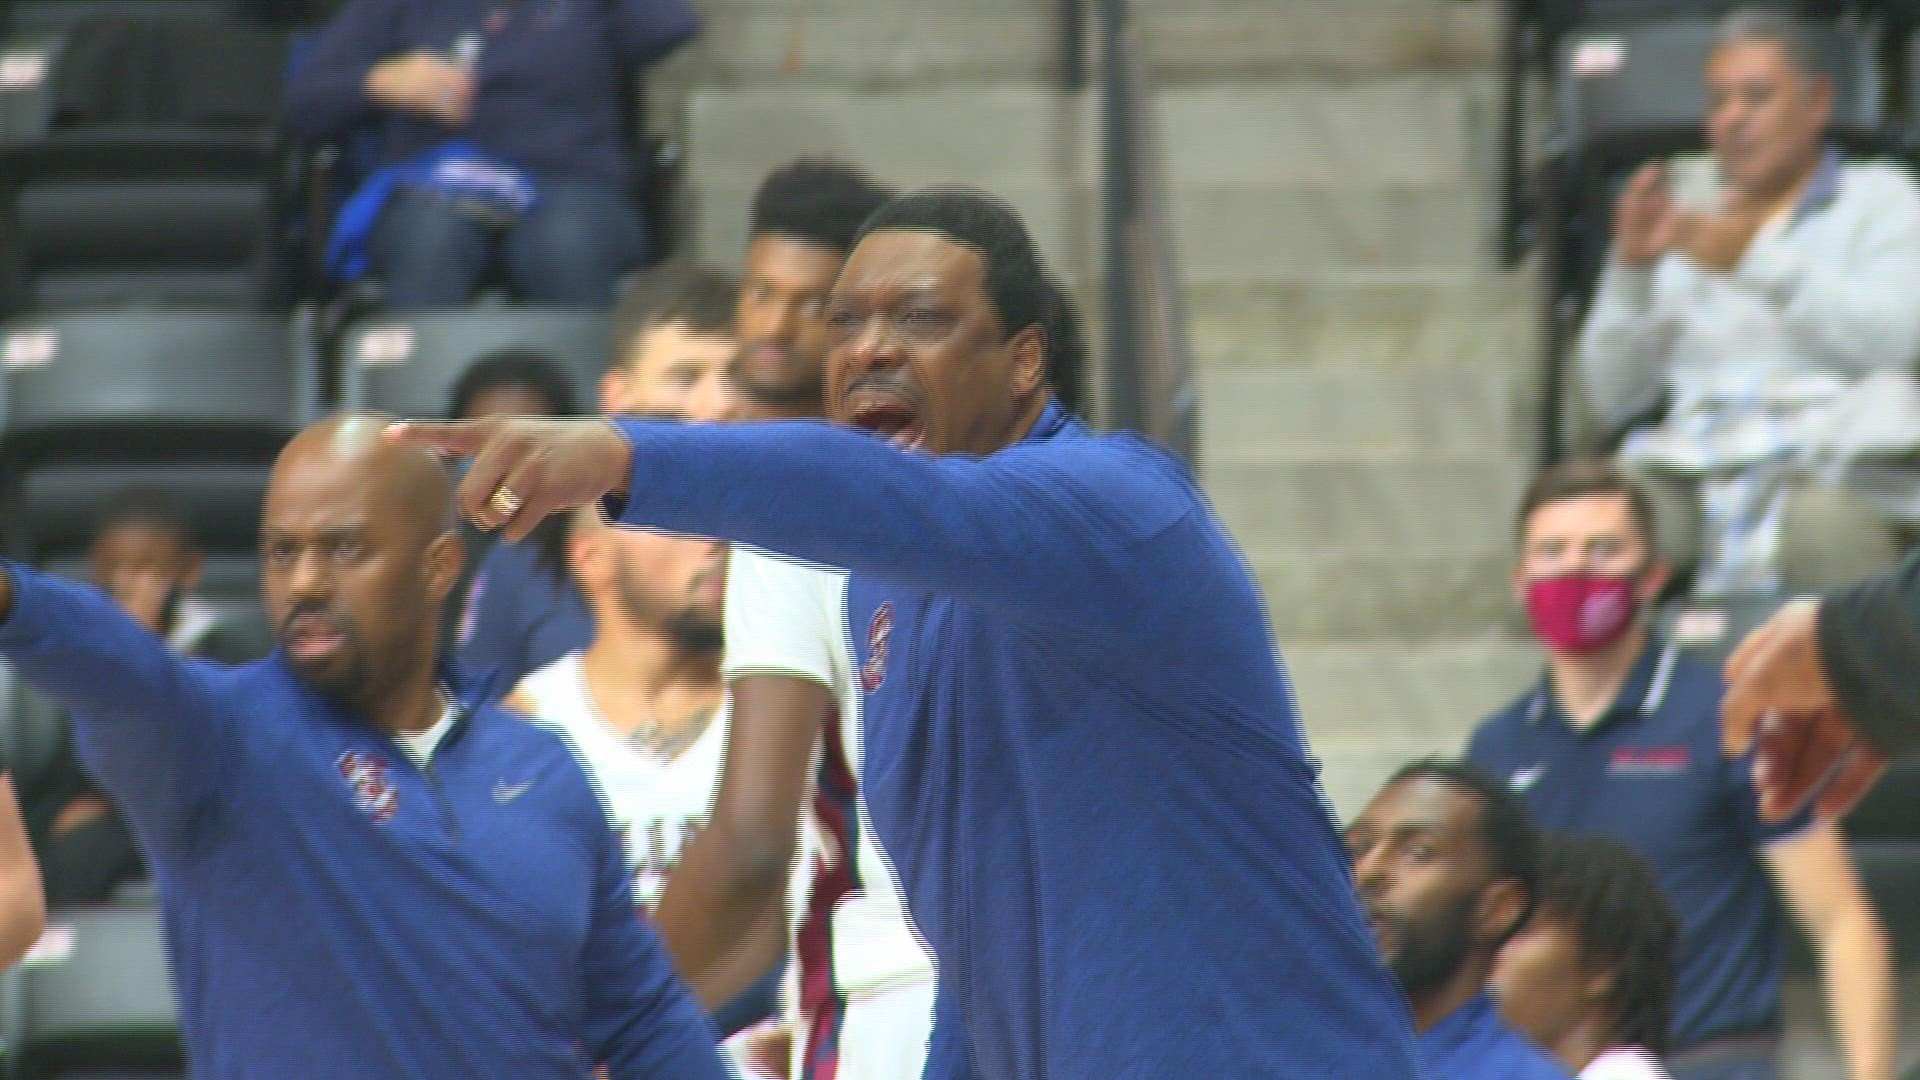 Highlights from South Carolina State's 67-66 win over High Point in the "No Room For Racism Classic" in Rock Hill.